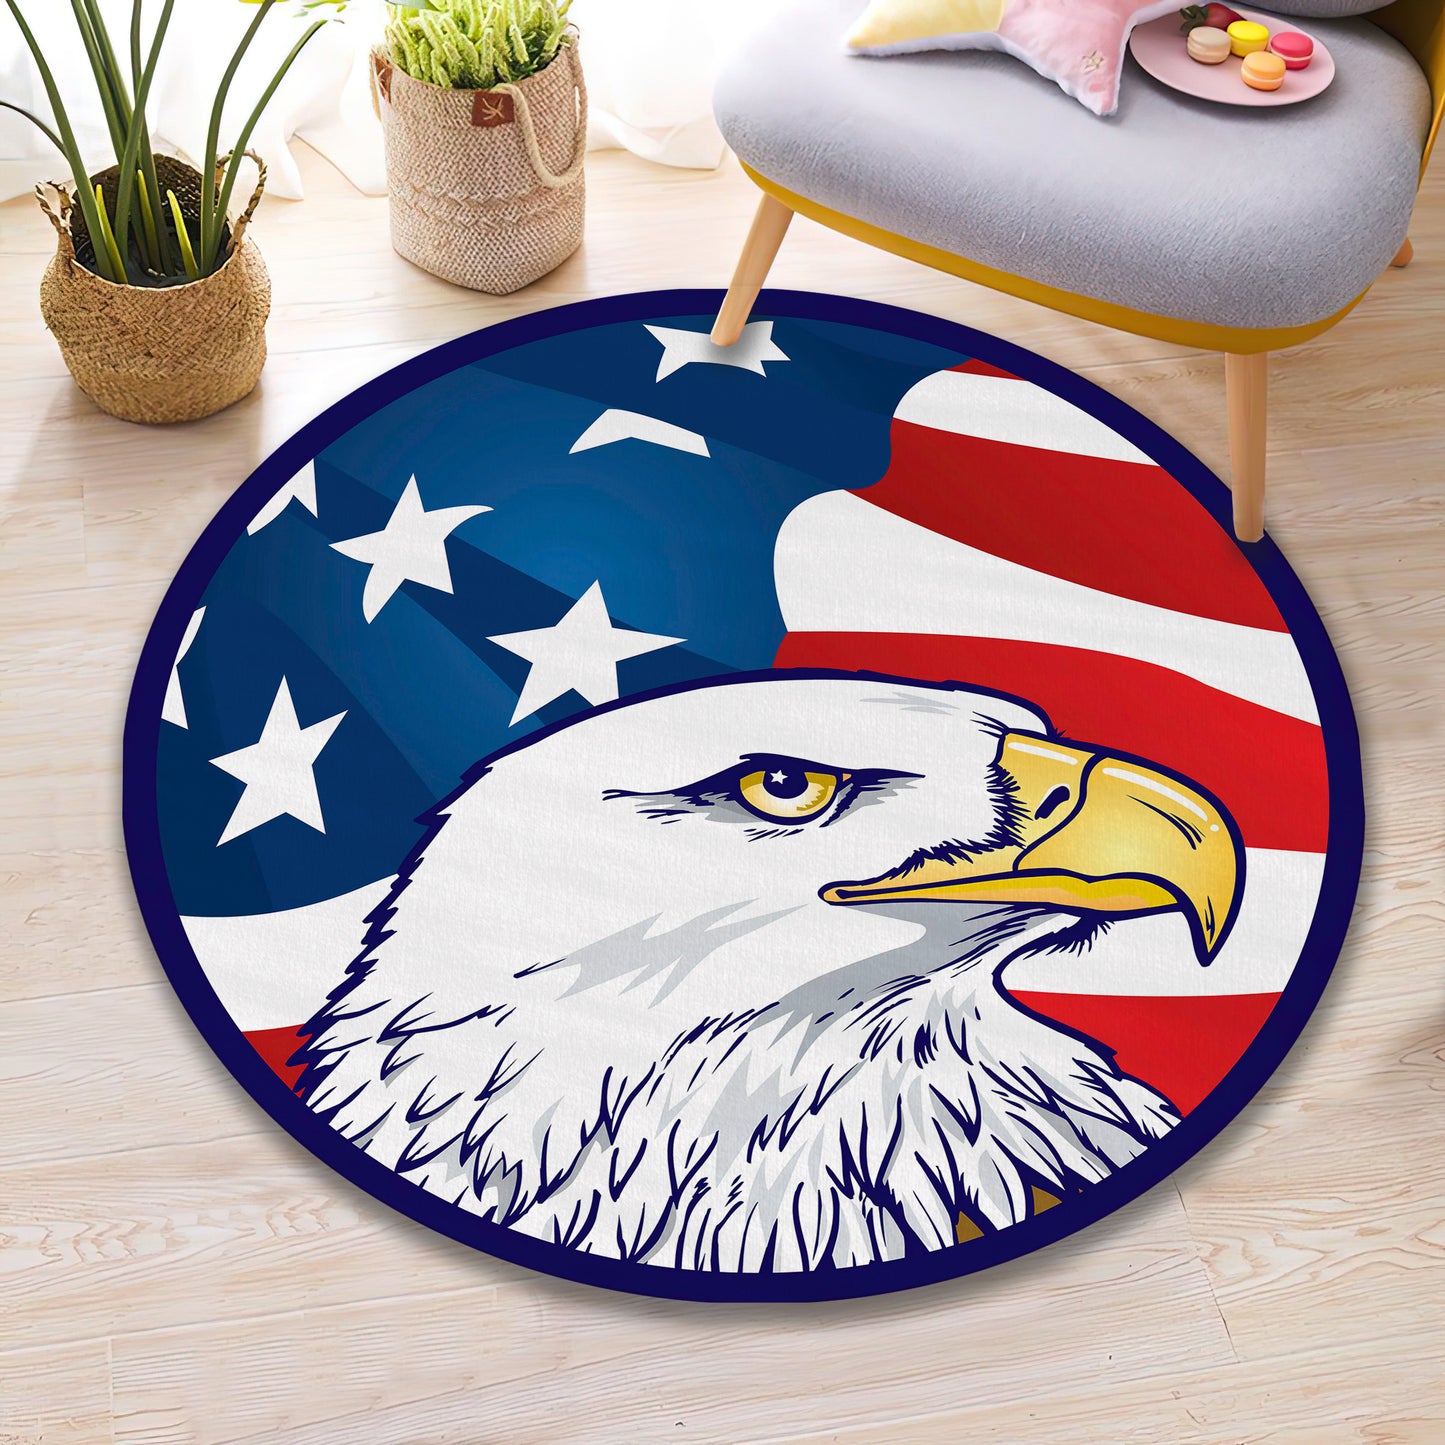 American Eagle Rug, Office Decor, Entryway Round Mat, American Flag Carpet, Office Gift